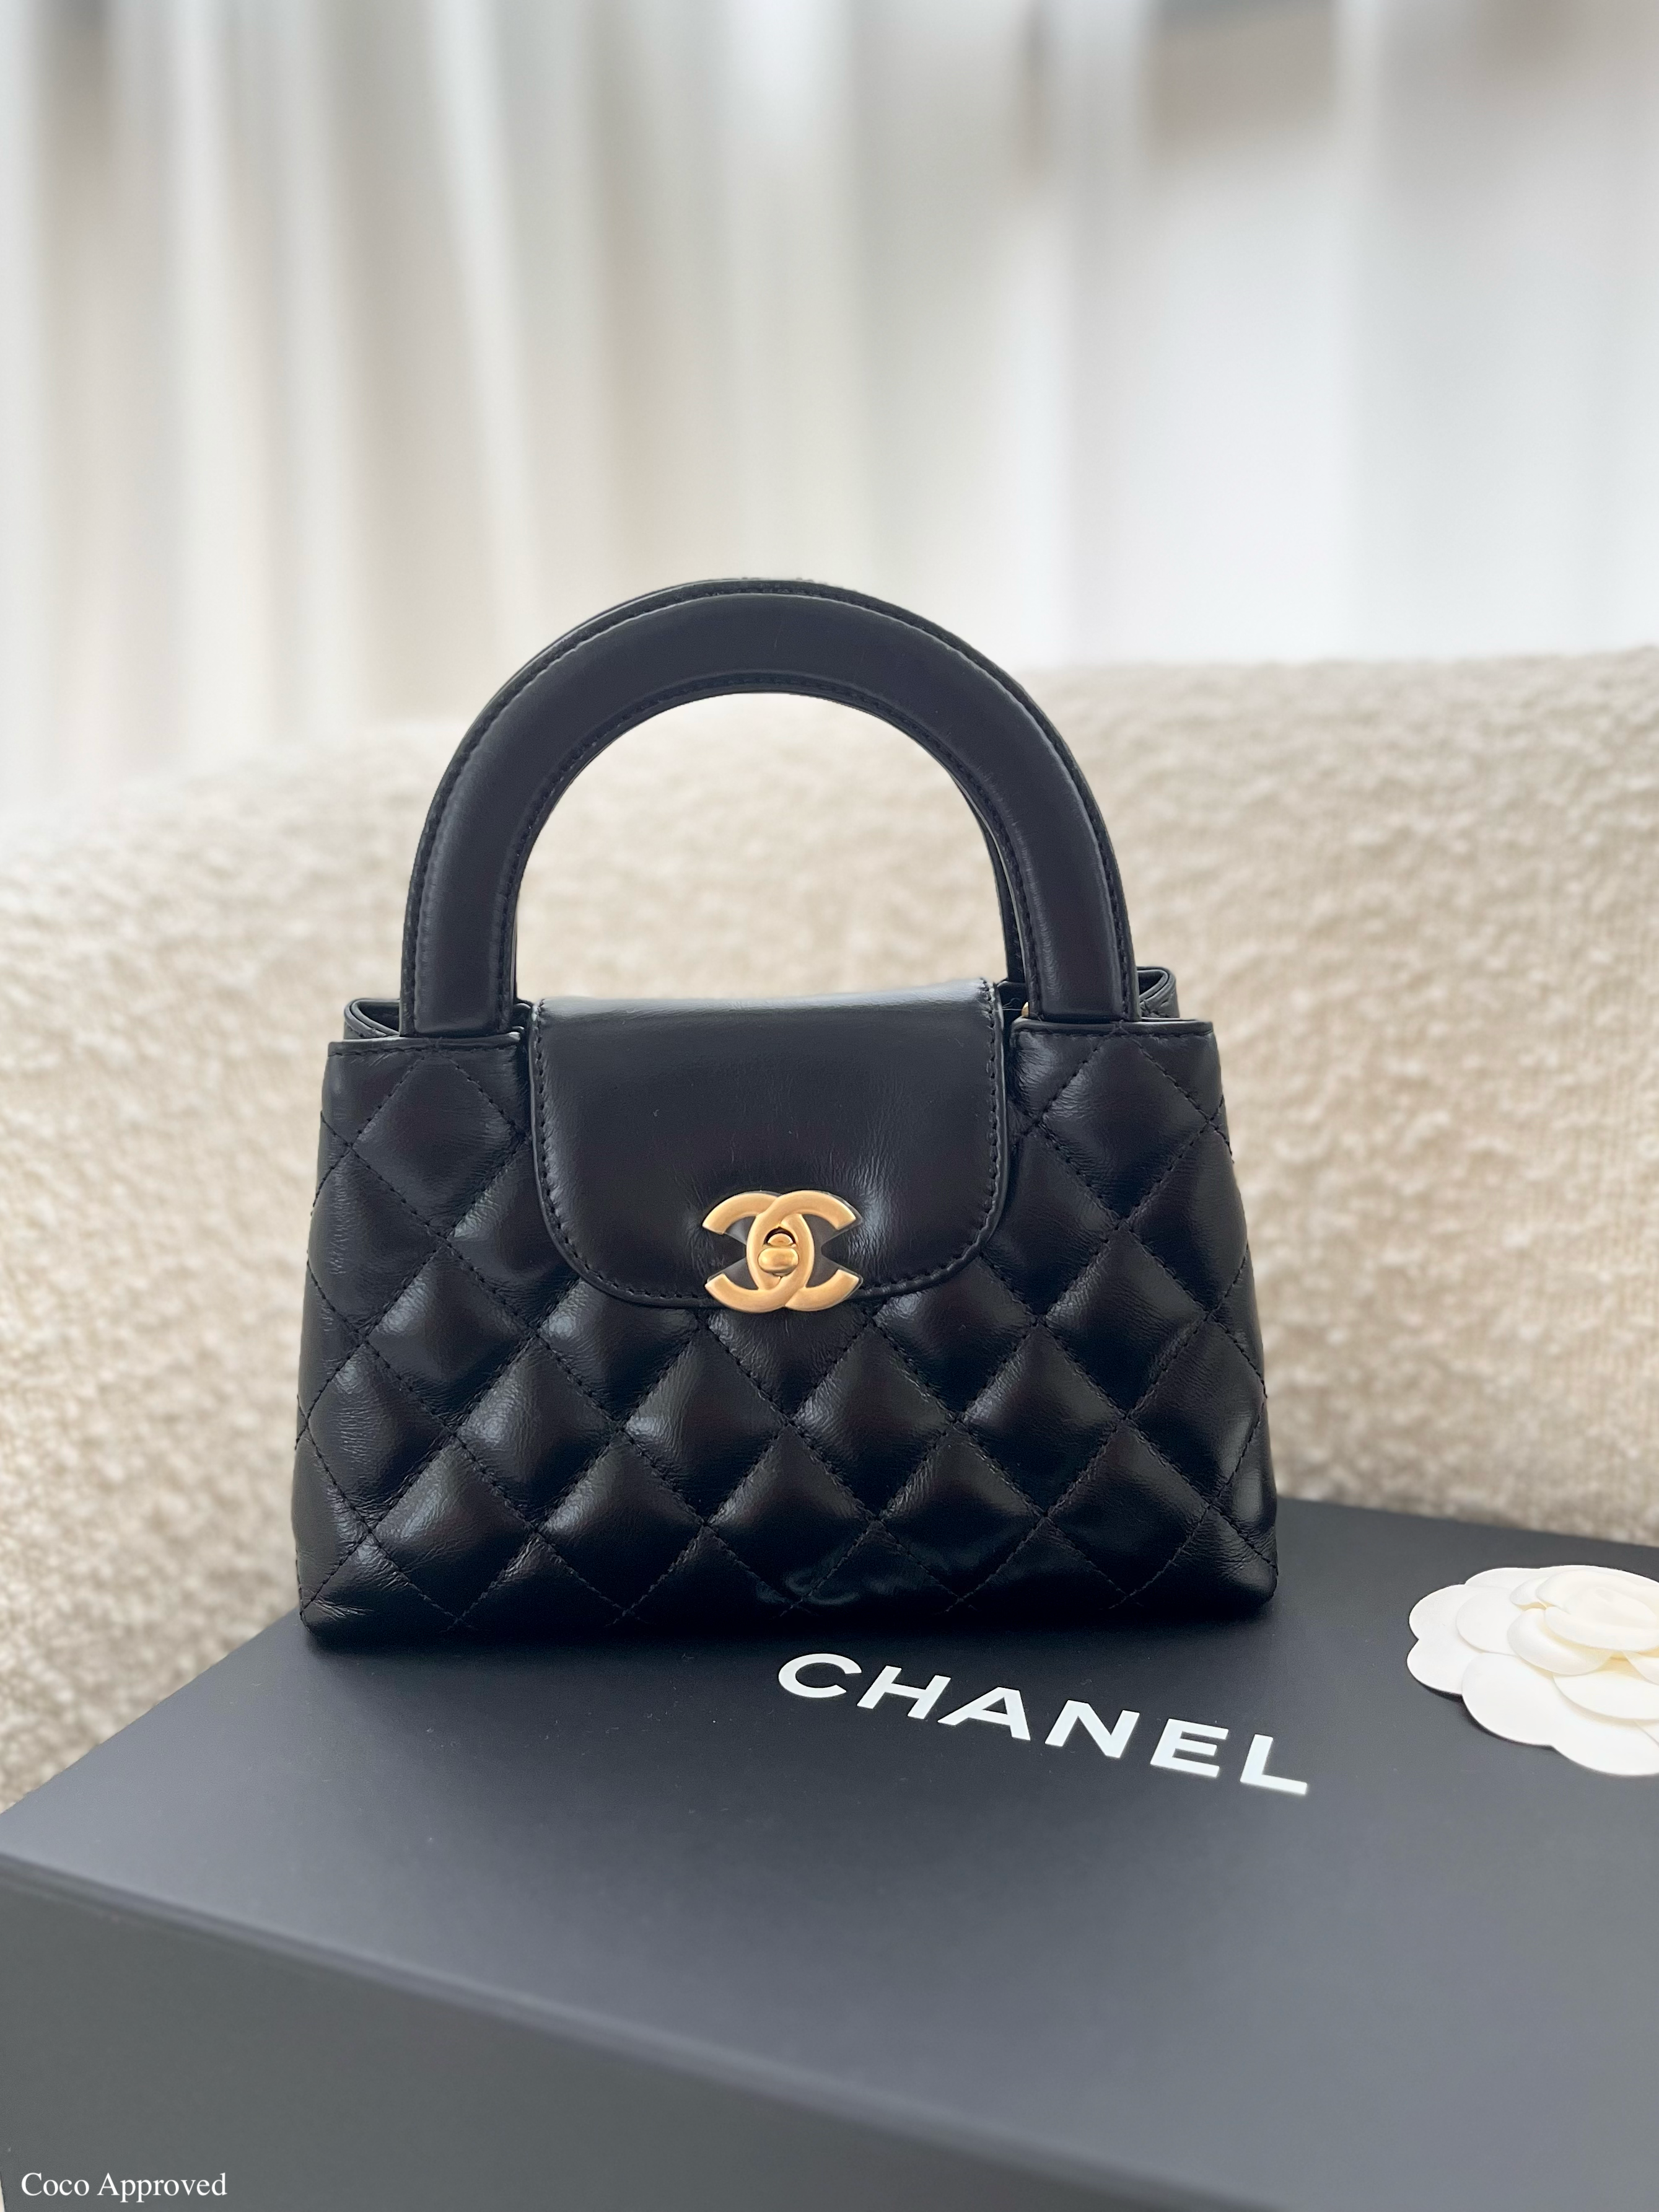 2023 Fall/Winter Hottest Trending Handbags: An Elite Selection – Coco  Approved Studio